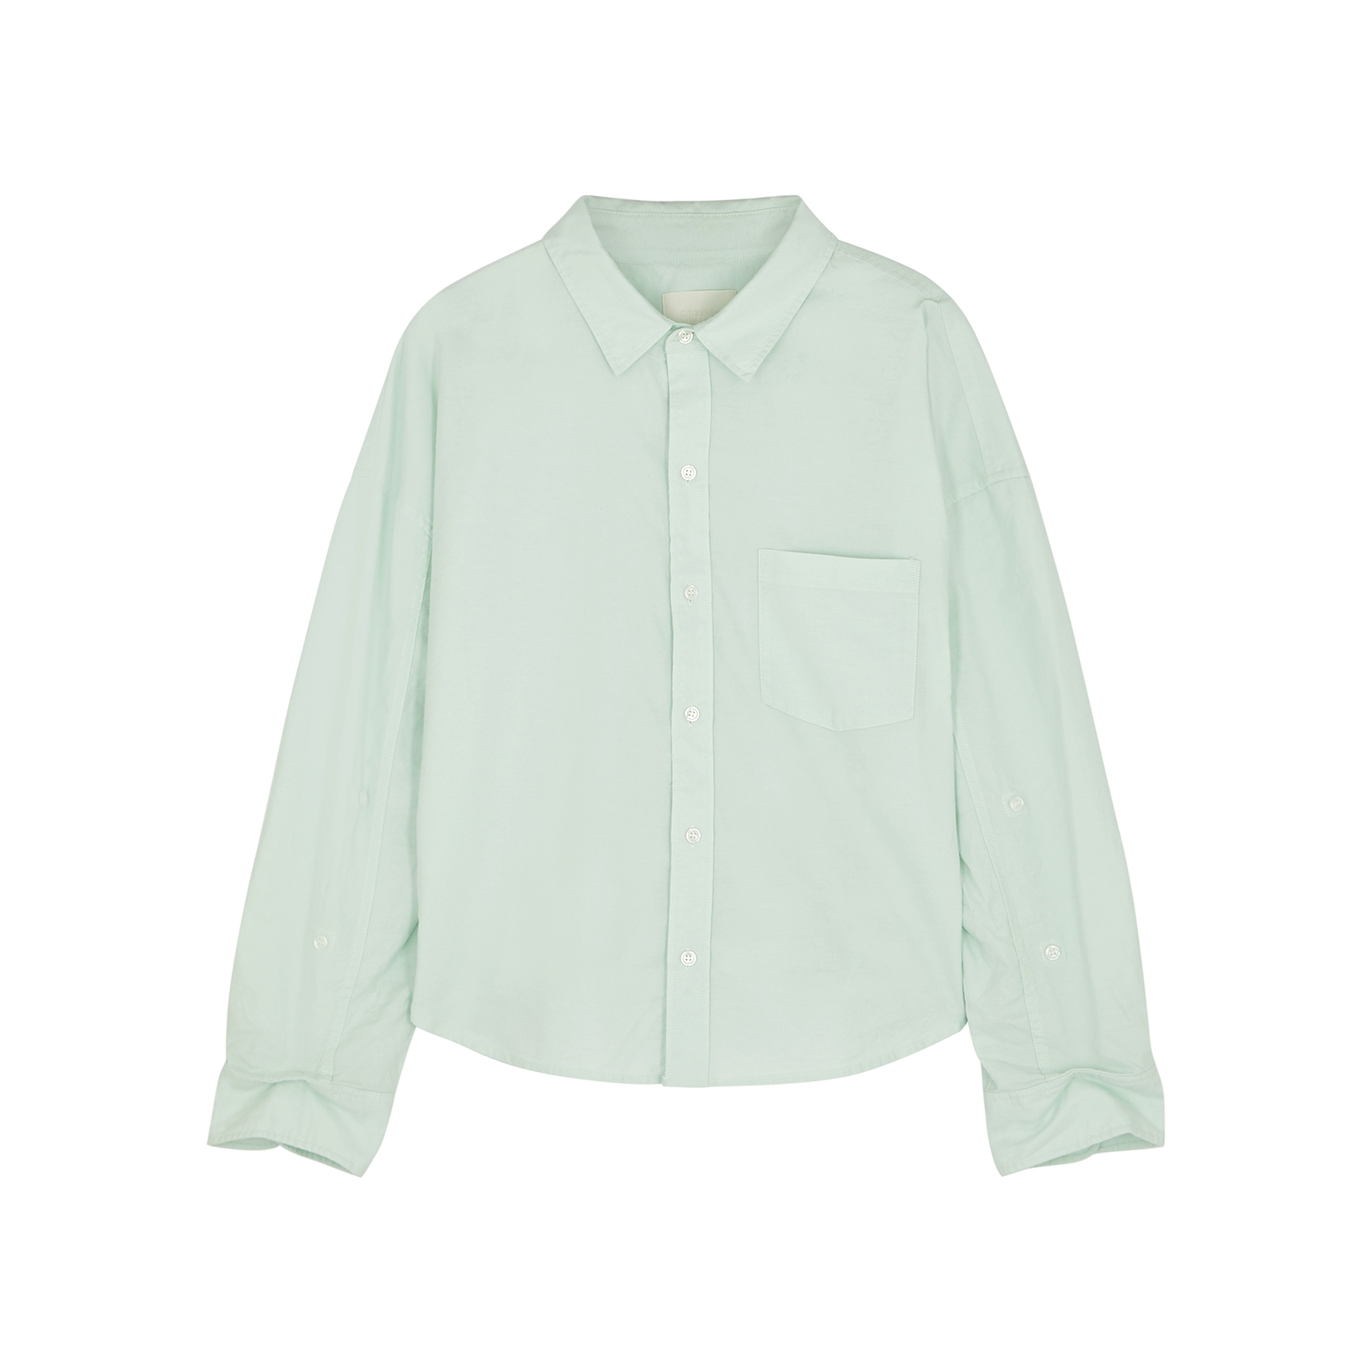 Citizens Of Humanity Brinkley Green Brushed Cotton Shirt - Light Green - L